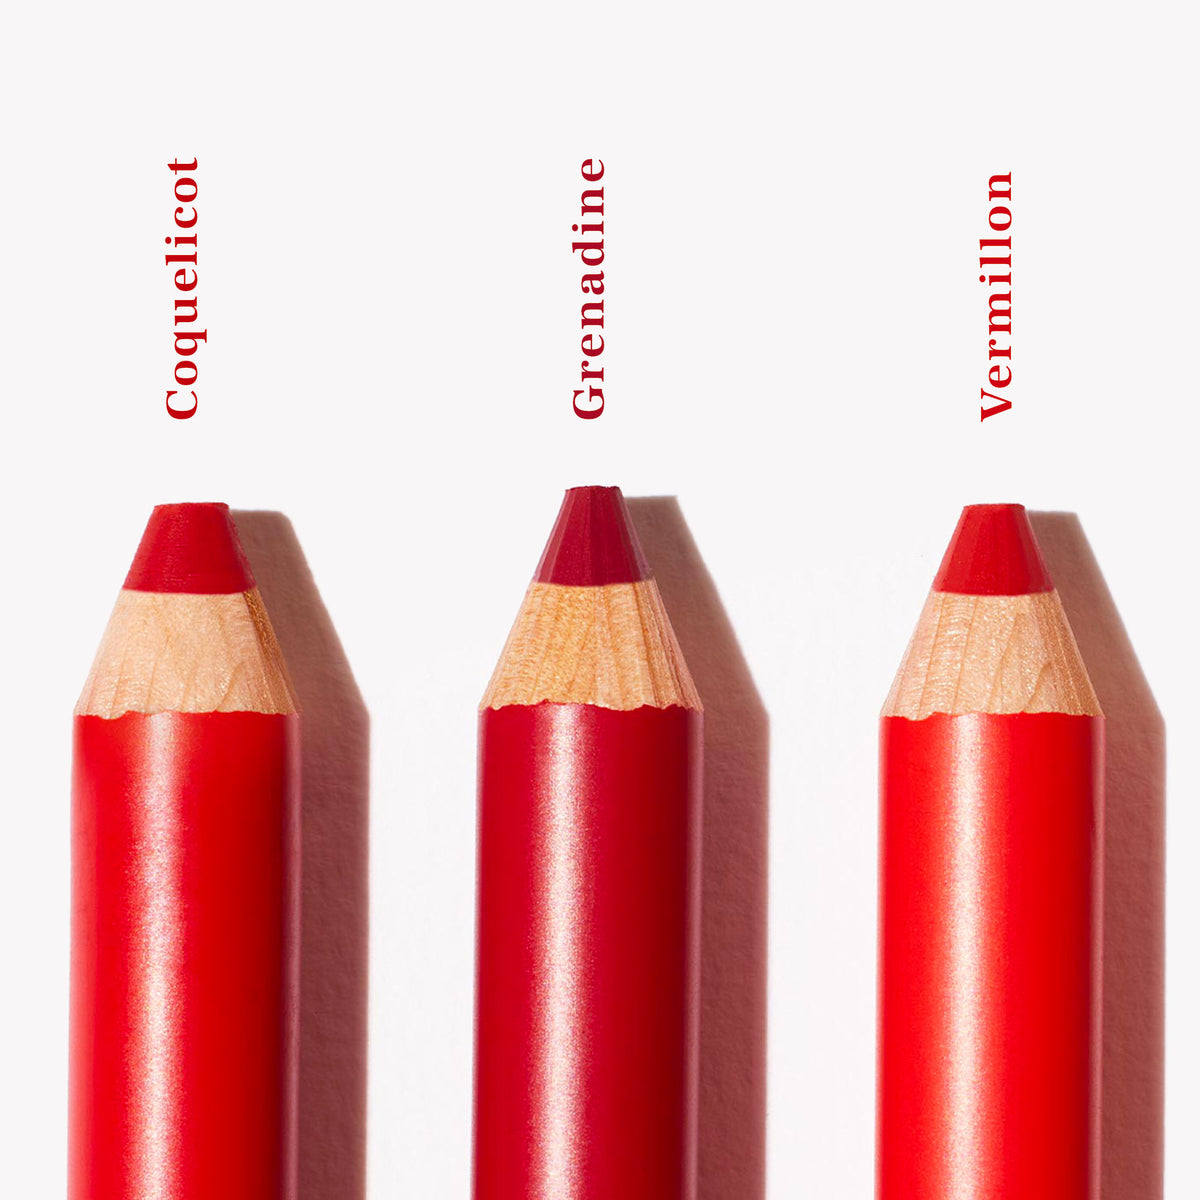 The Red lip pencils – Yolaine